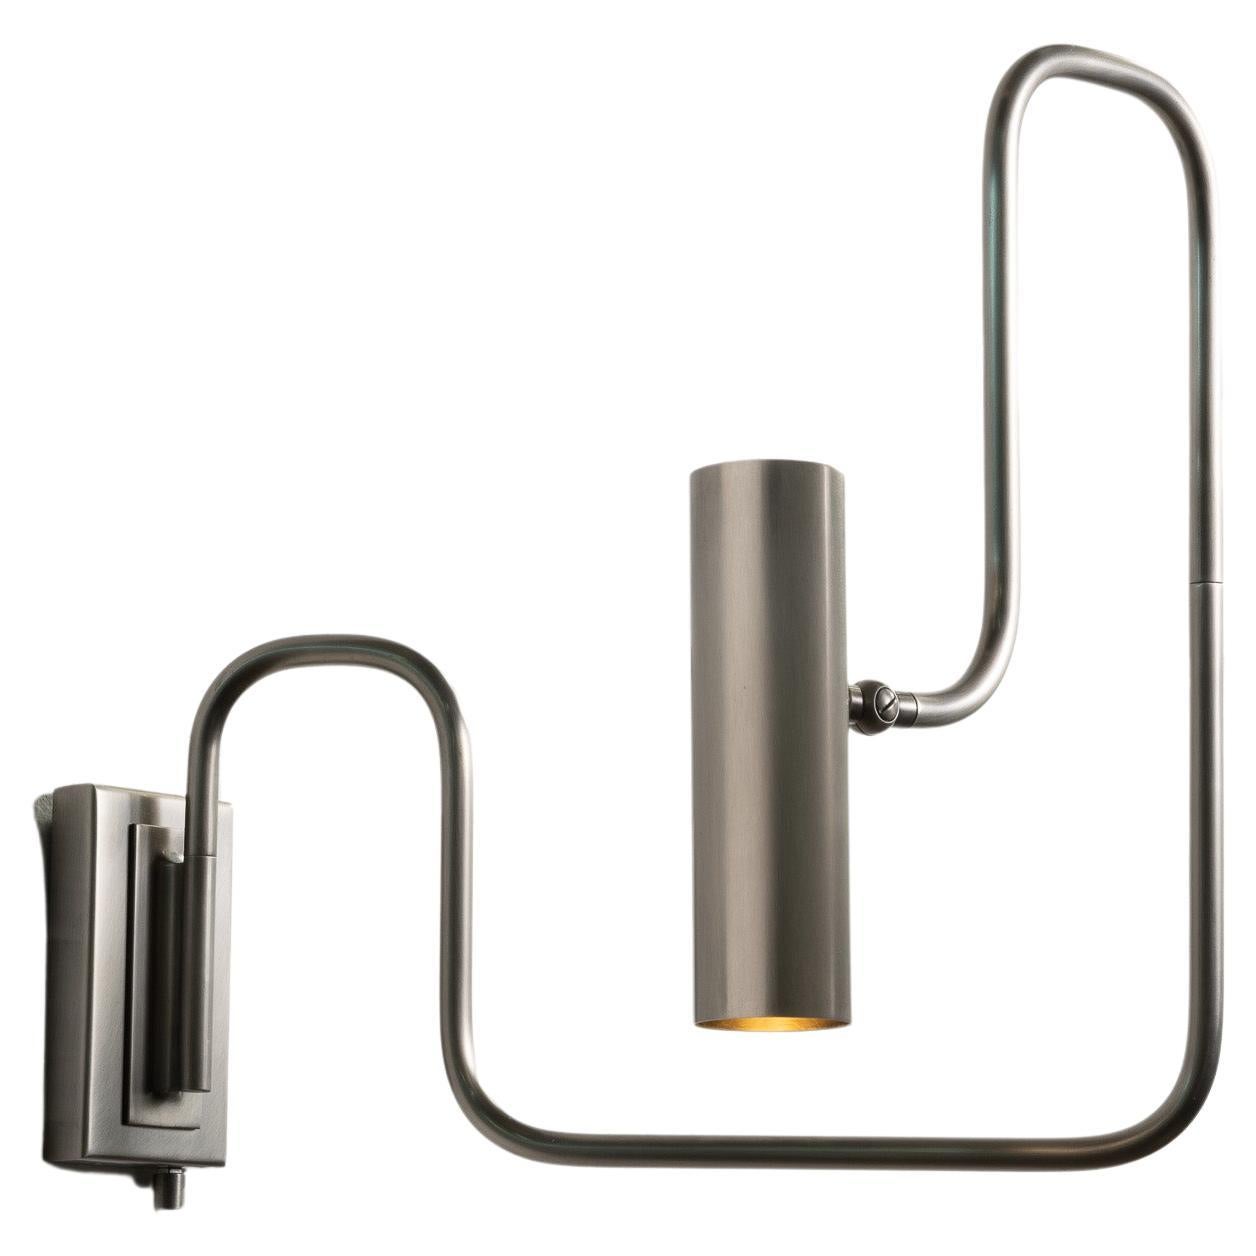 Pivot Single Wall Sconce with Articulating Arms in Medium Bronze